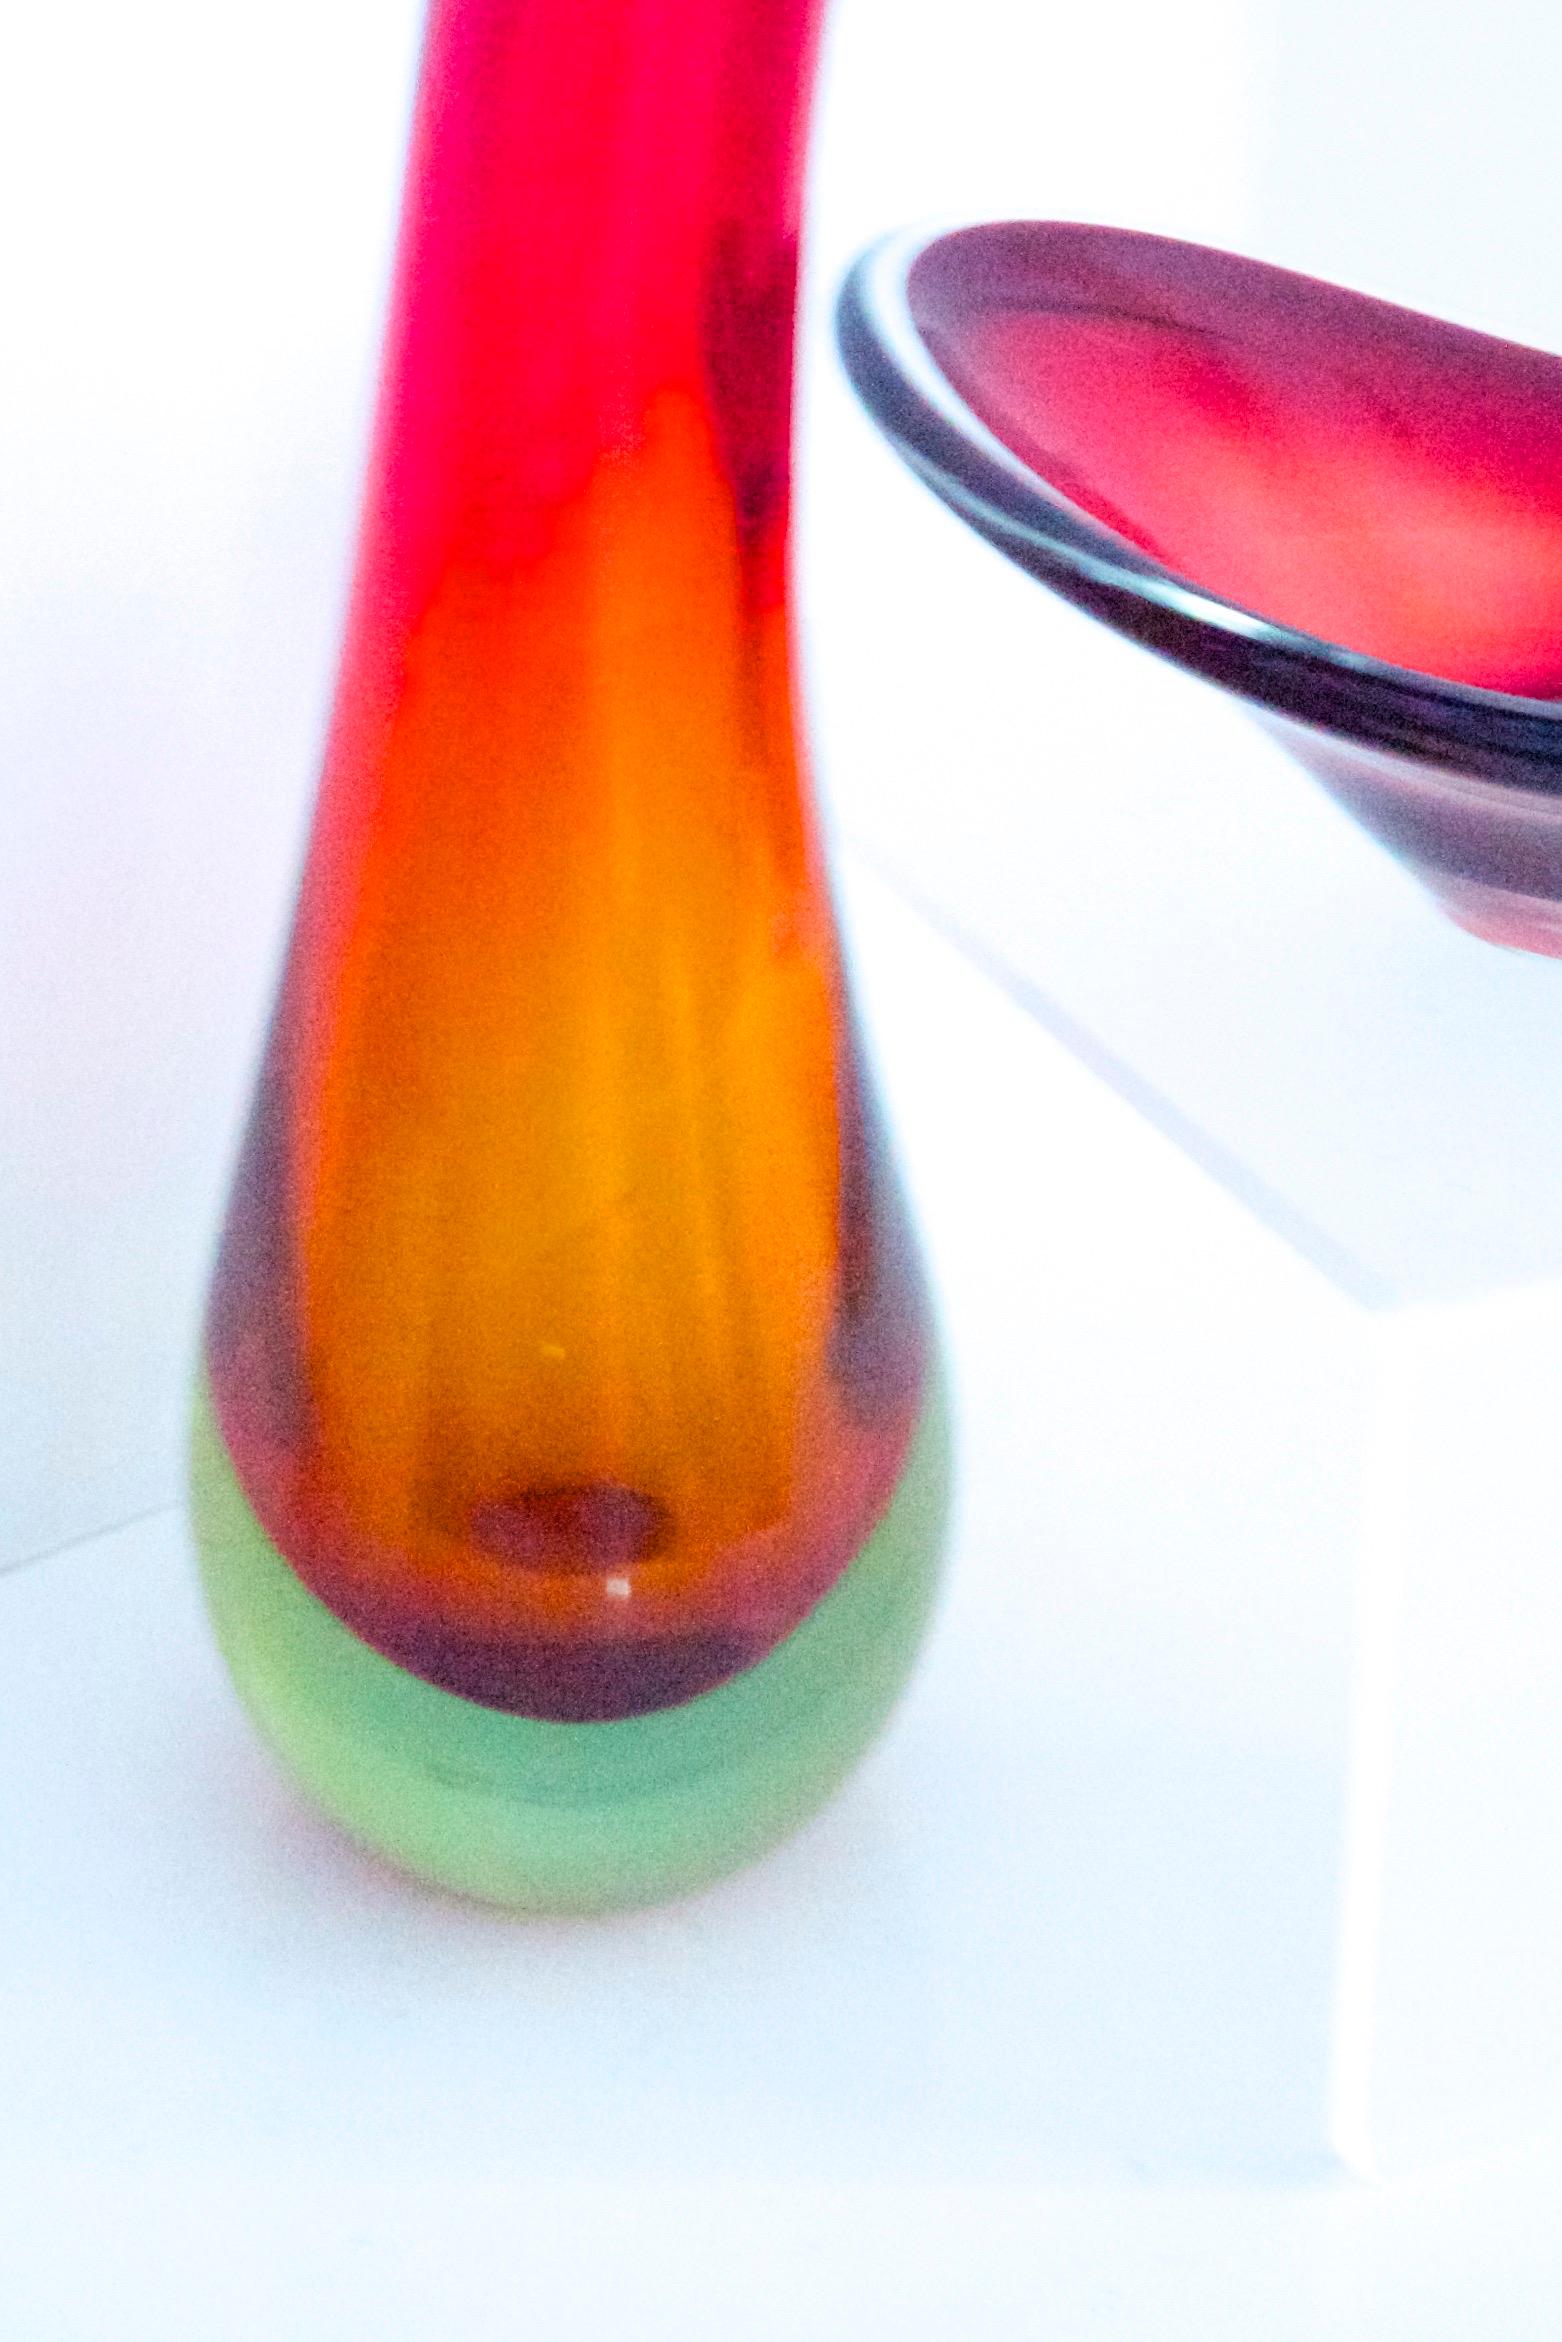 Mid-Century Modern Italian Modernist Murano Sommerso Vase by Flavio Poli with Dish For Sale